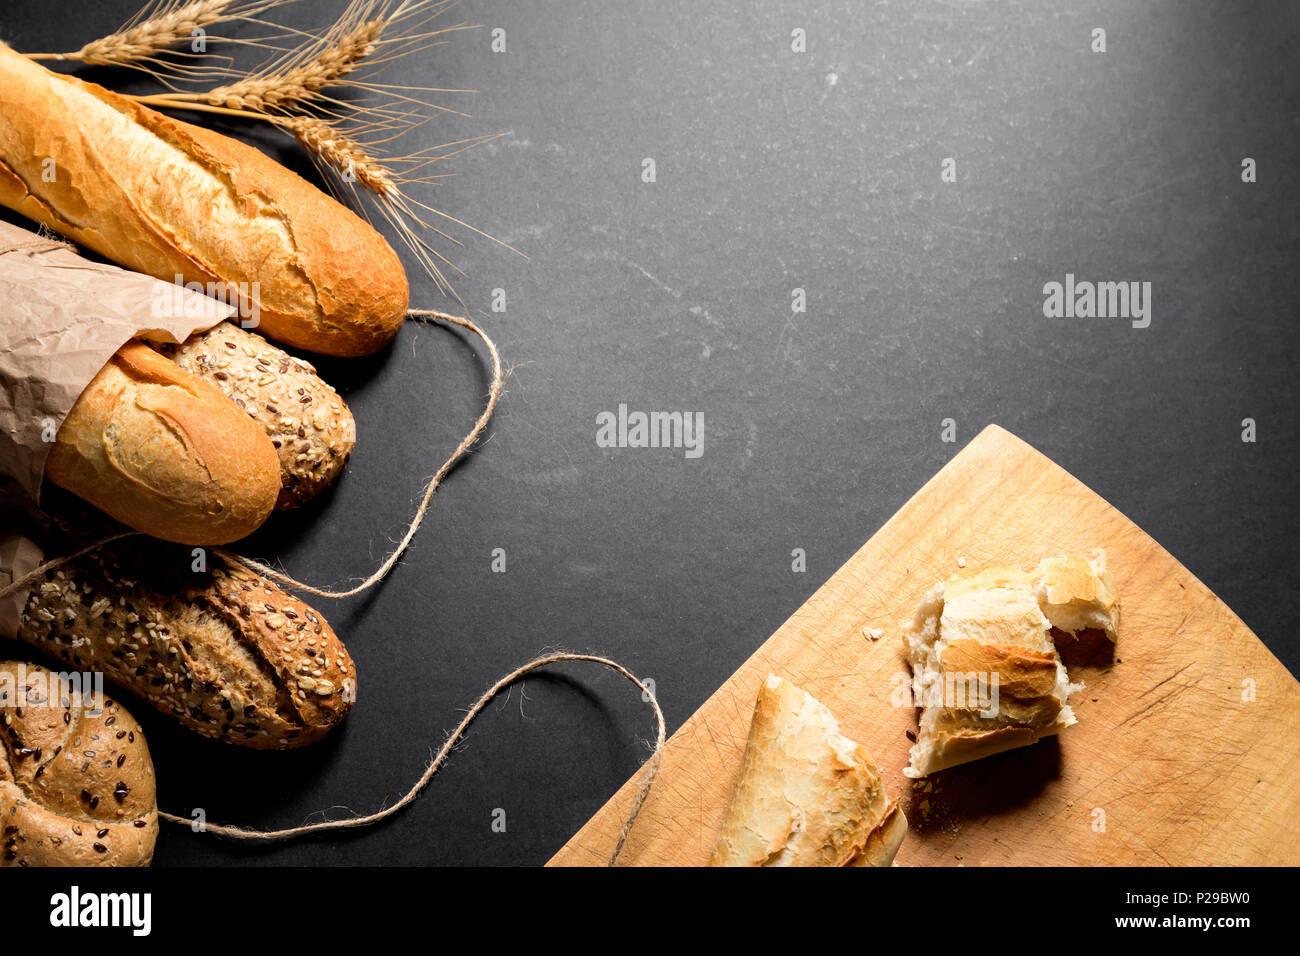 Different fresh bread with seeds and wooden bottom with crumbs, on black background. Useful as baker background Stock Photo